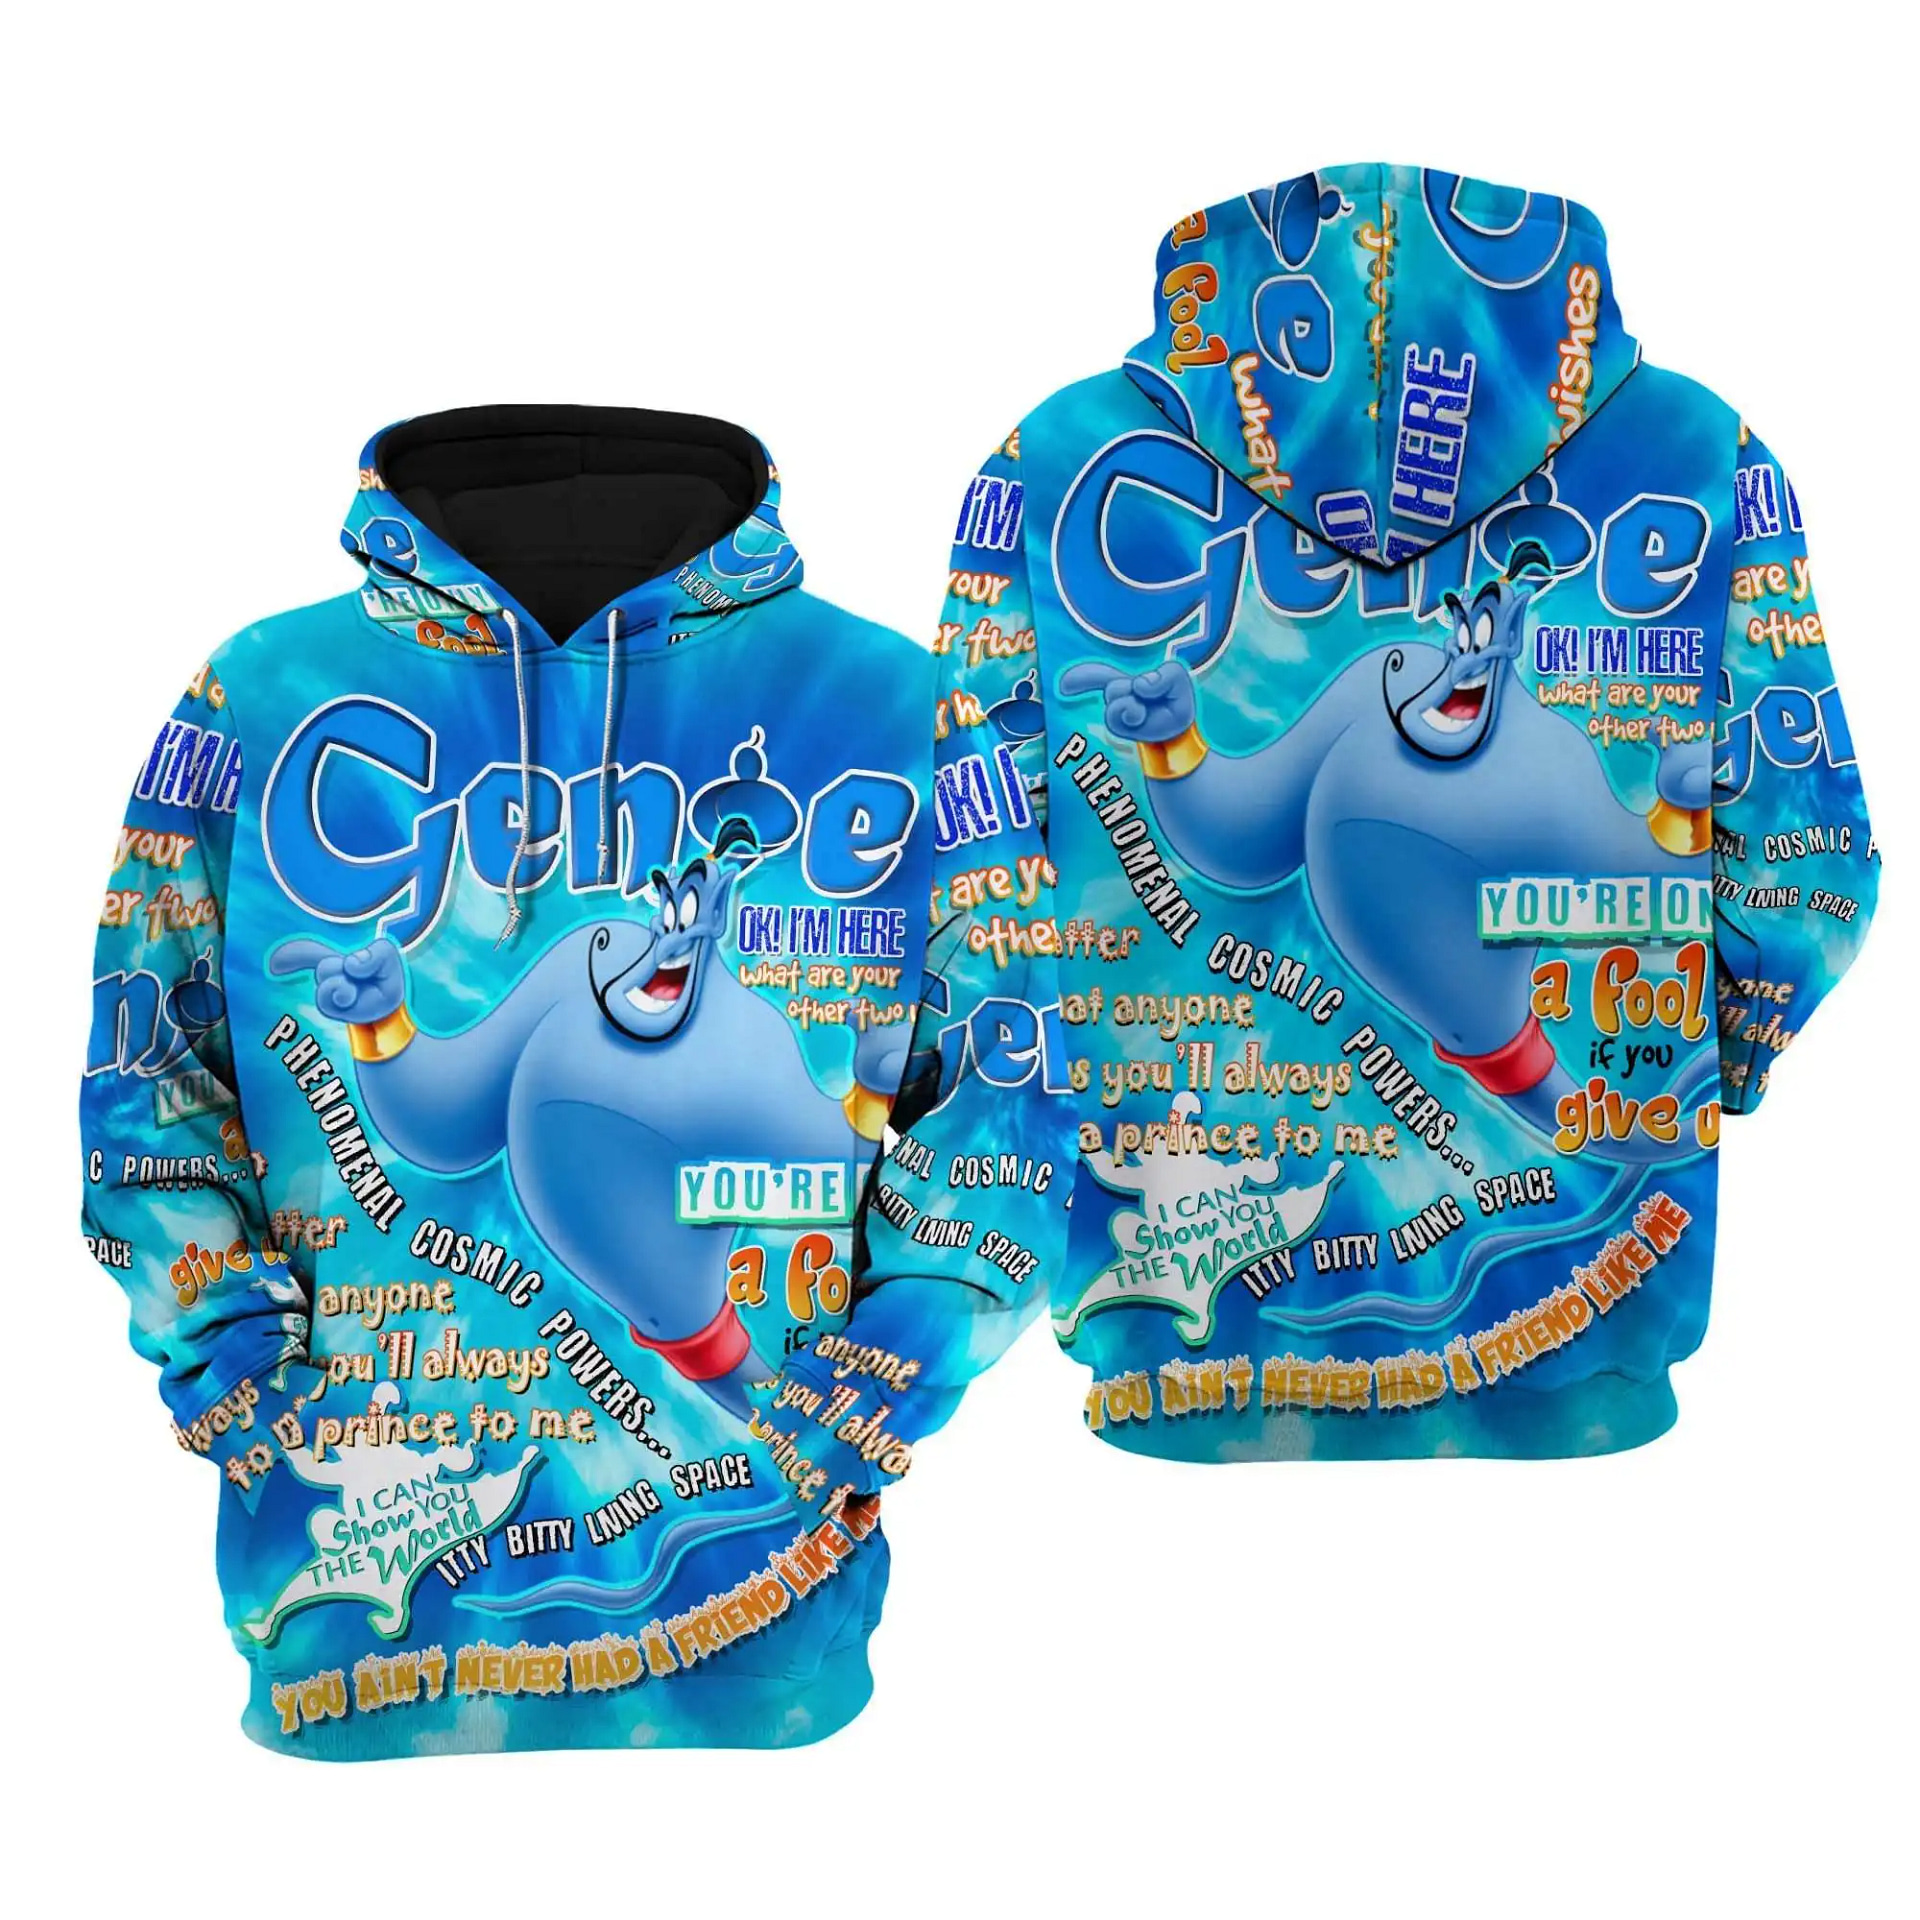 Aladdin Genie Words Pattern Disney Quotes Cartoon Graphic Outfits Clothing Men Women Kids Toddlers Hoodie 3D